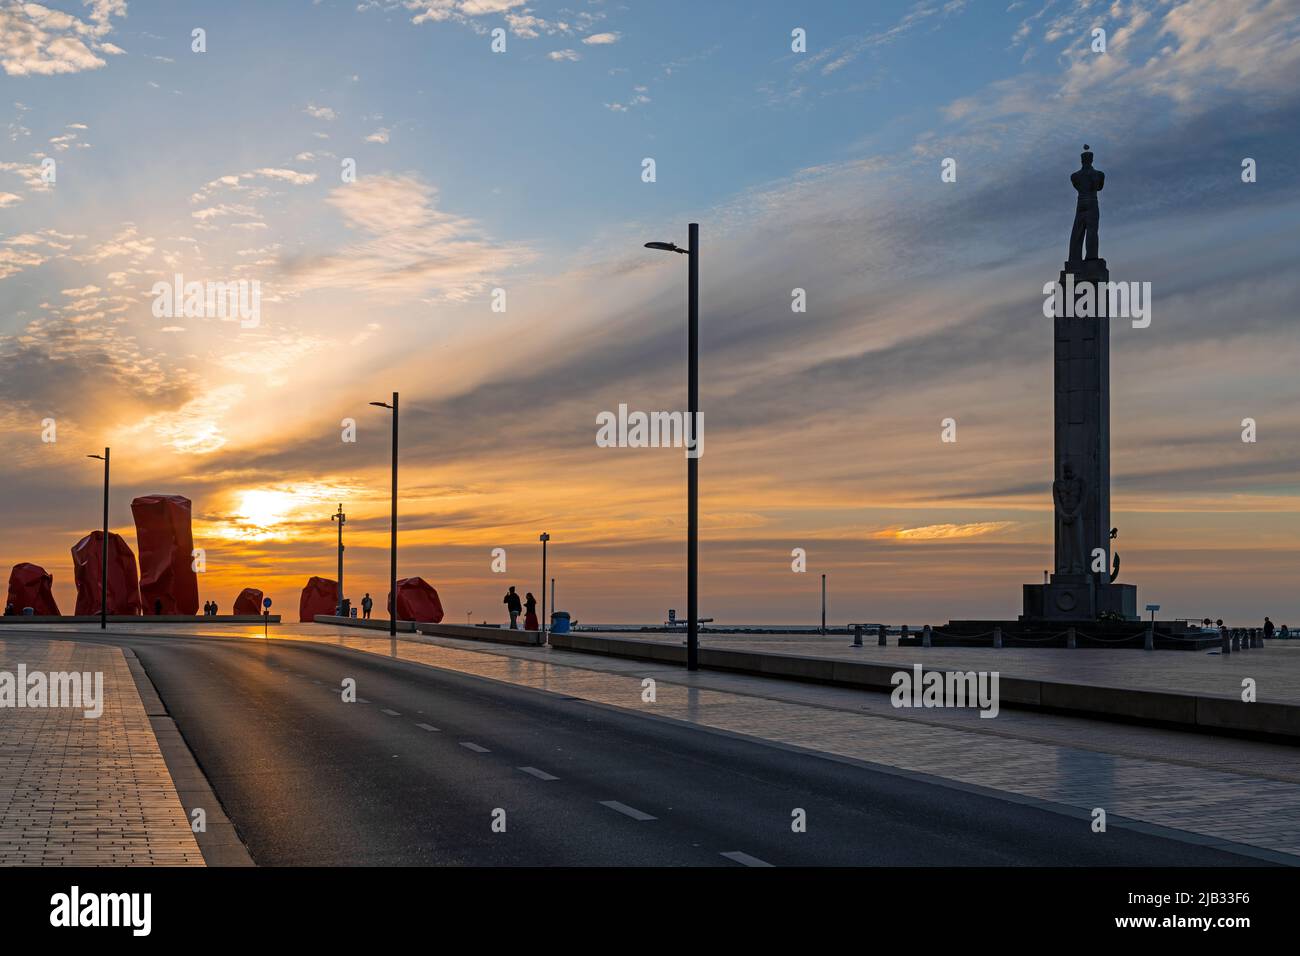 The waterfront promenade of Oostende (Ostend) by its North Sea beach at sunset, Belgium. Stock Photo